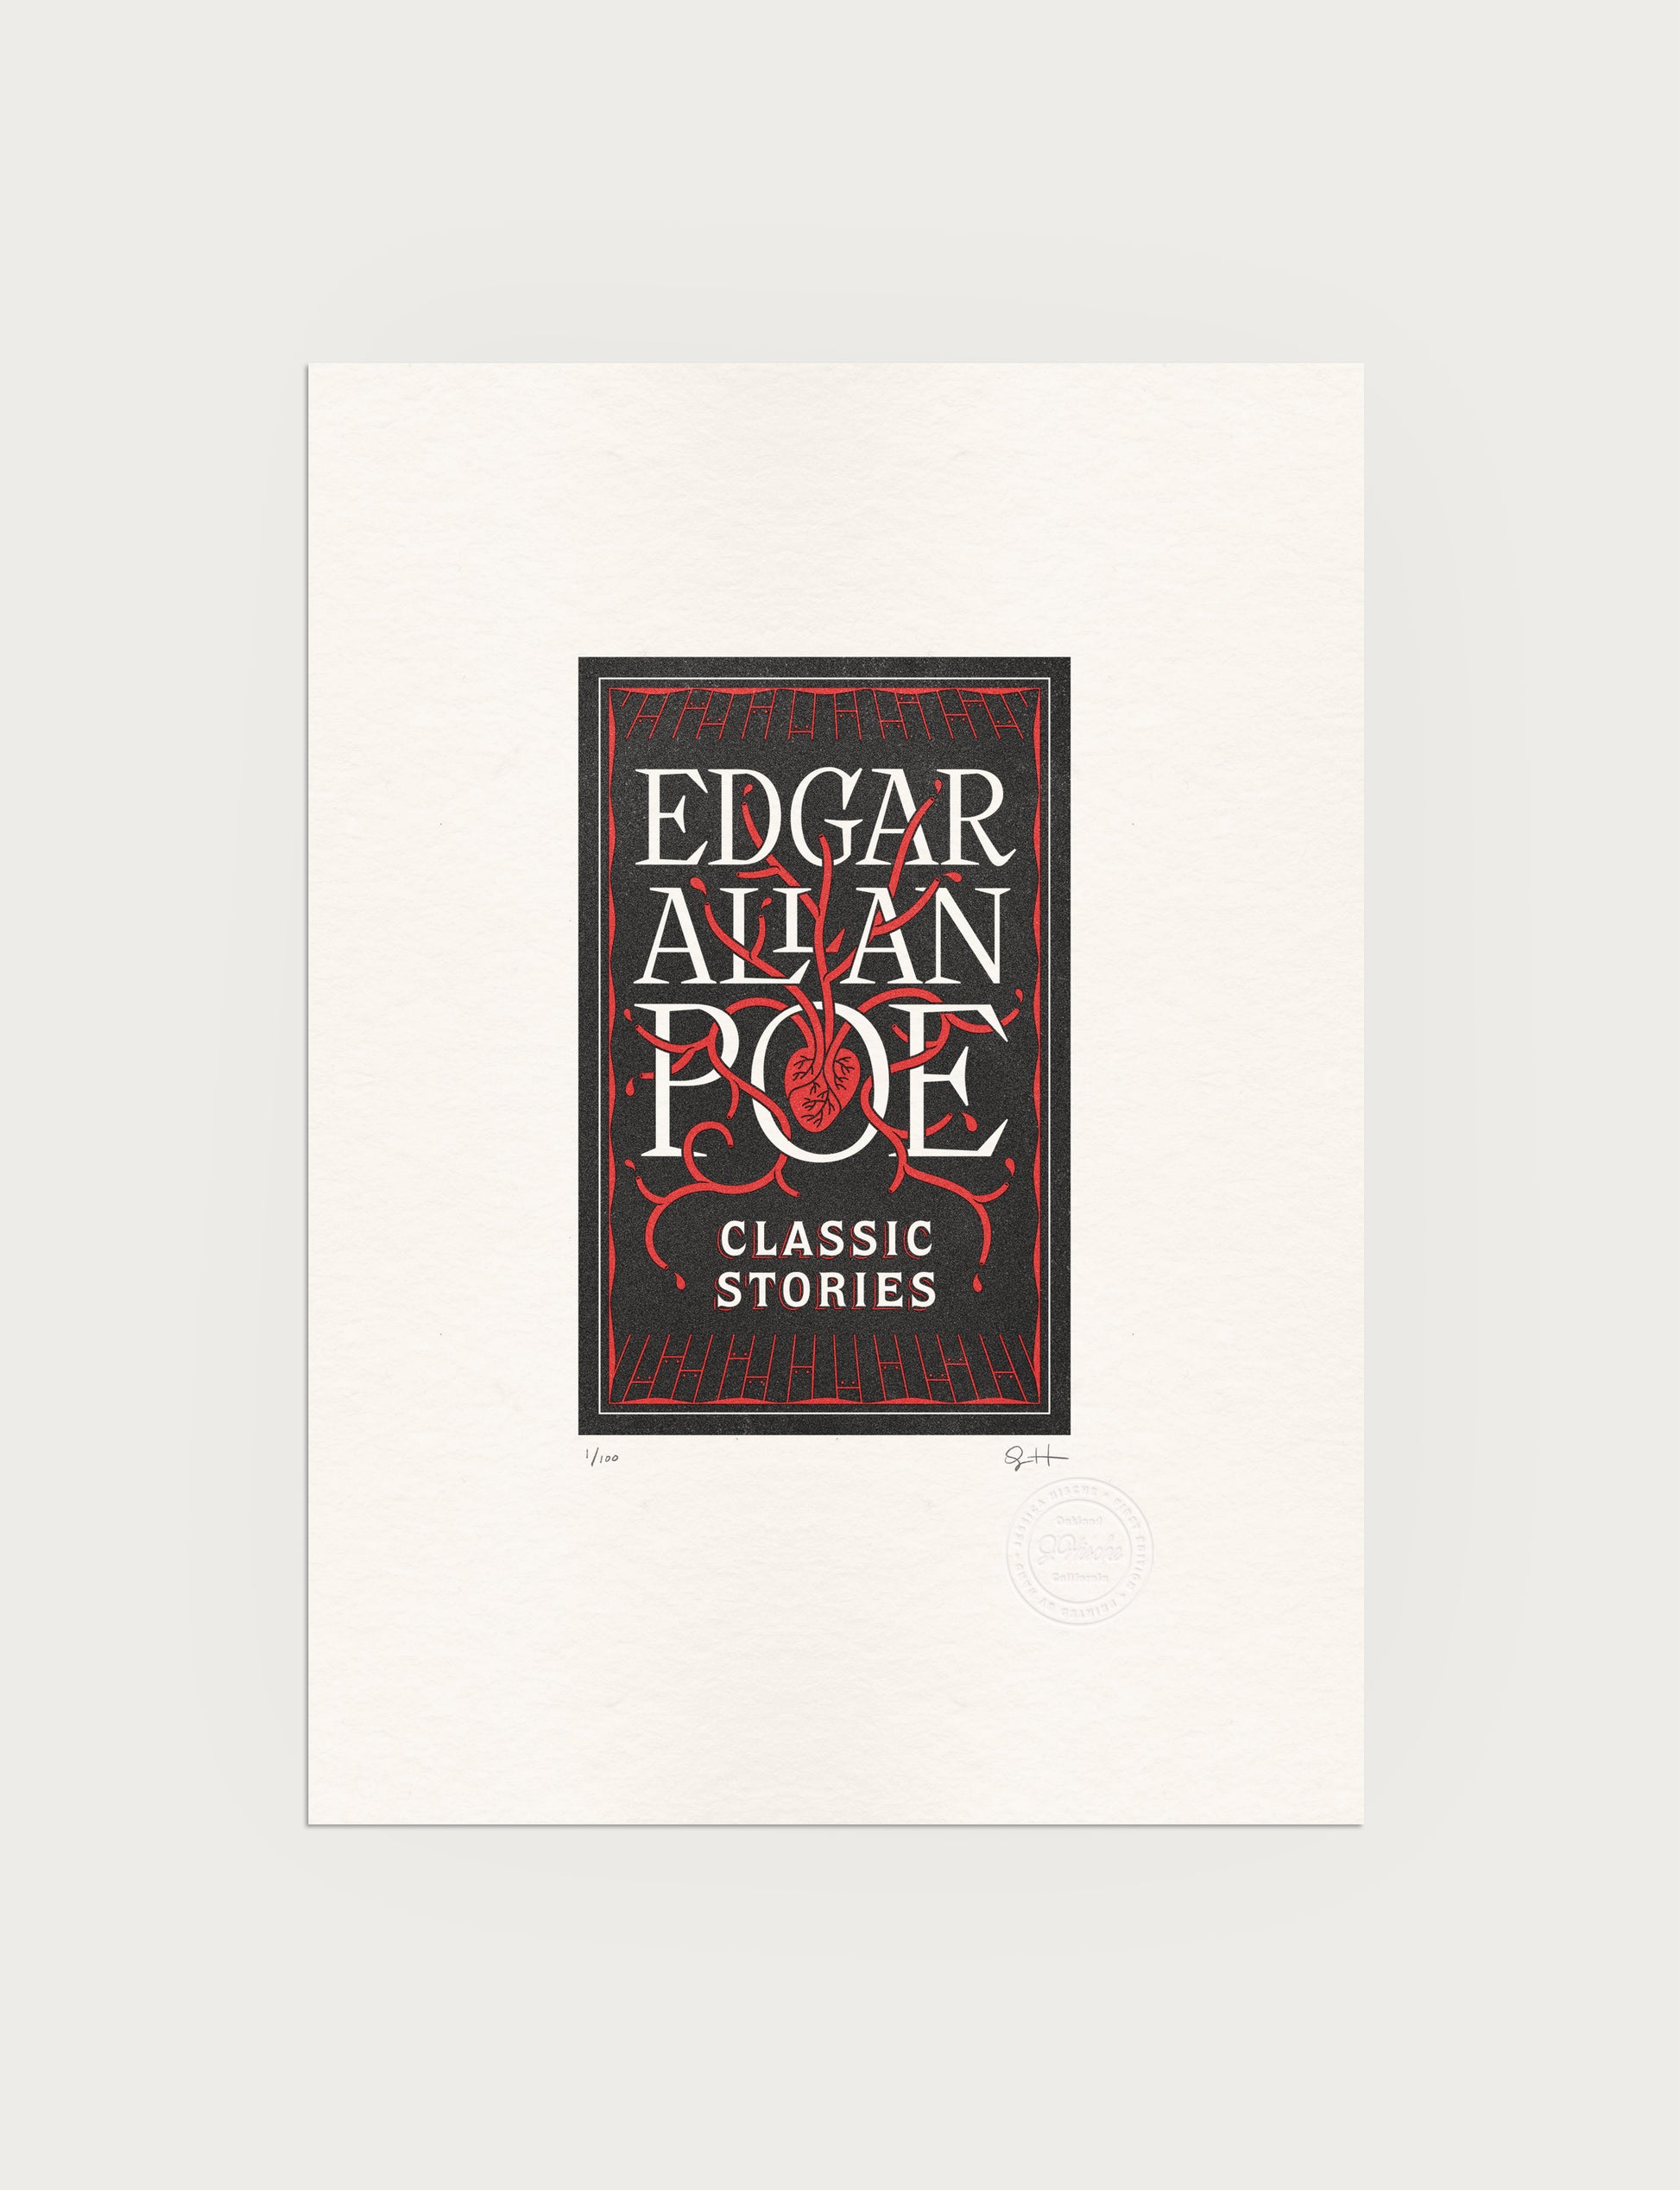 2-color letterpress print in black and red. Printed artwork is an illustrated book cover of Edgar Allan Poe including custom hand lettering.